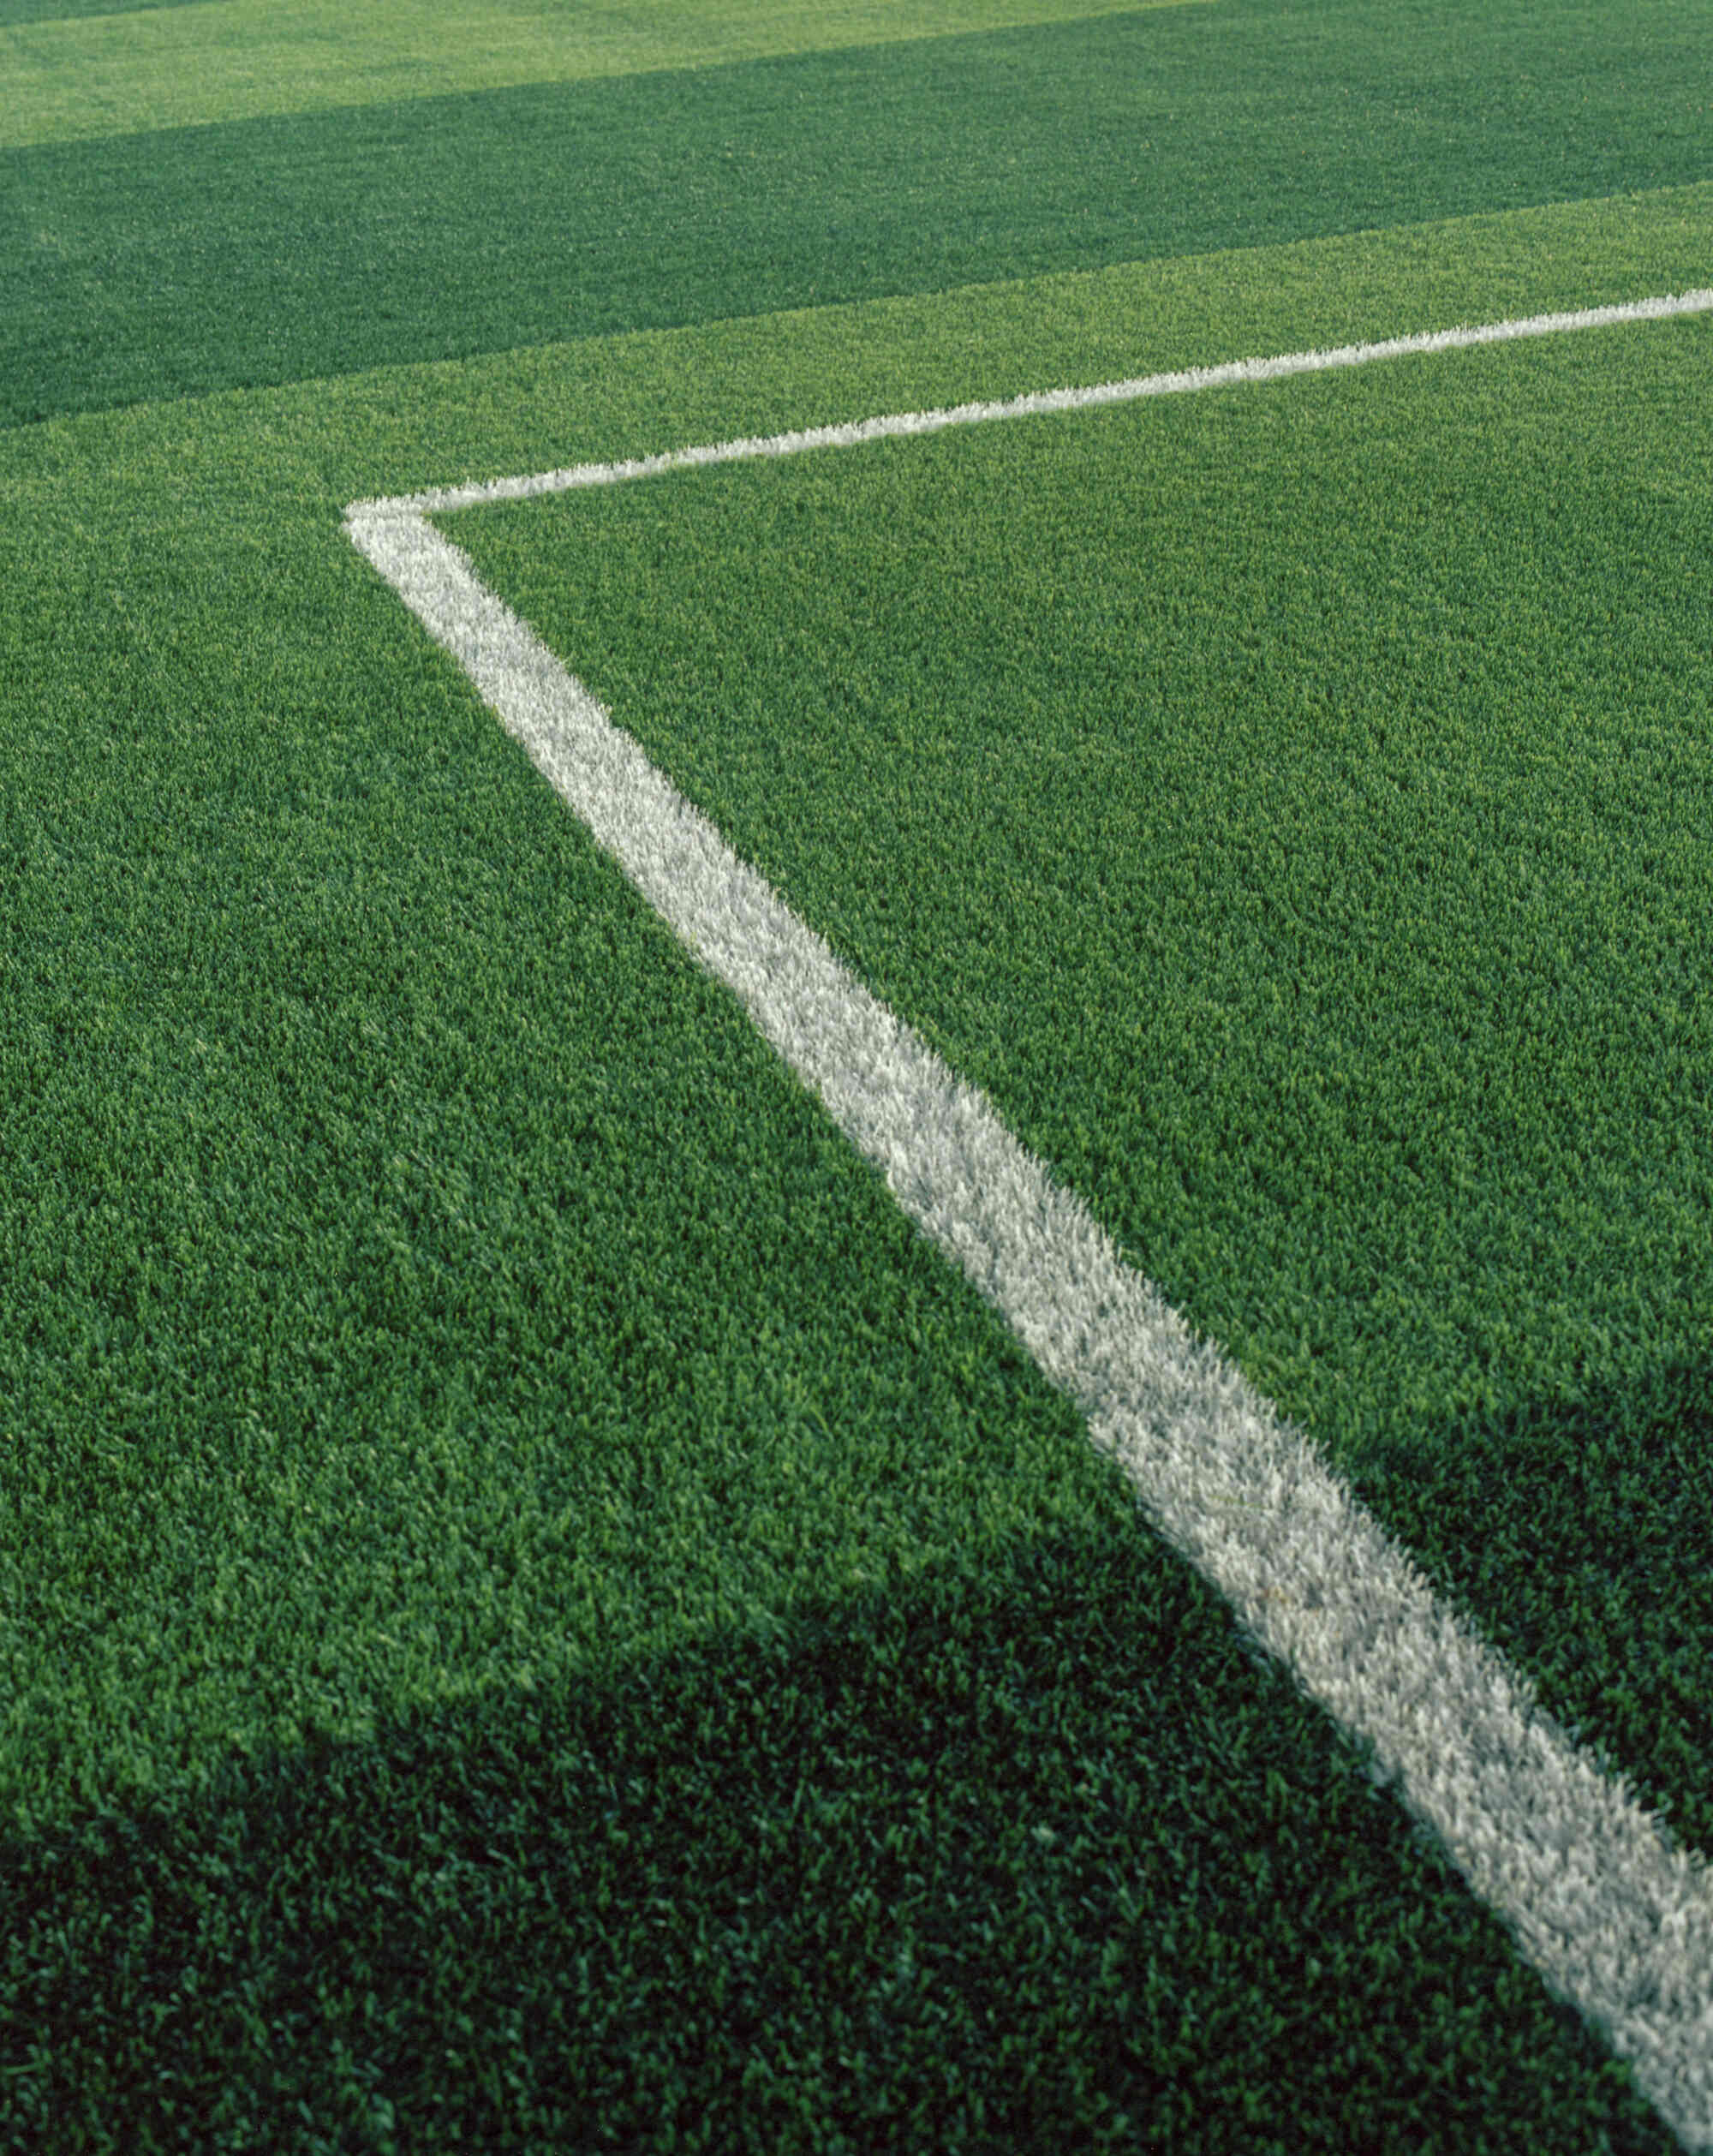 Photograph of synthetic turf on an athletic field. The photo shows green turf and one white line with a 90-degree angle in it.